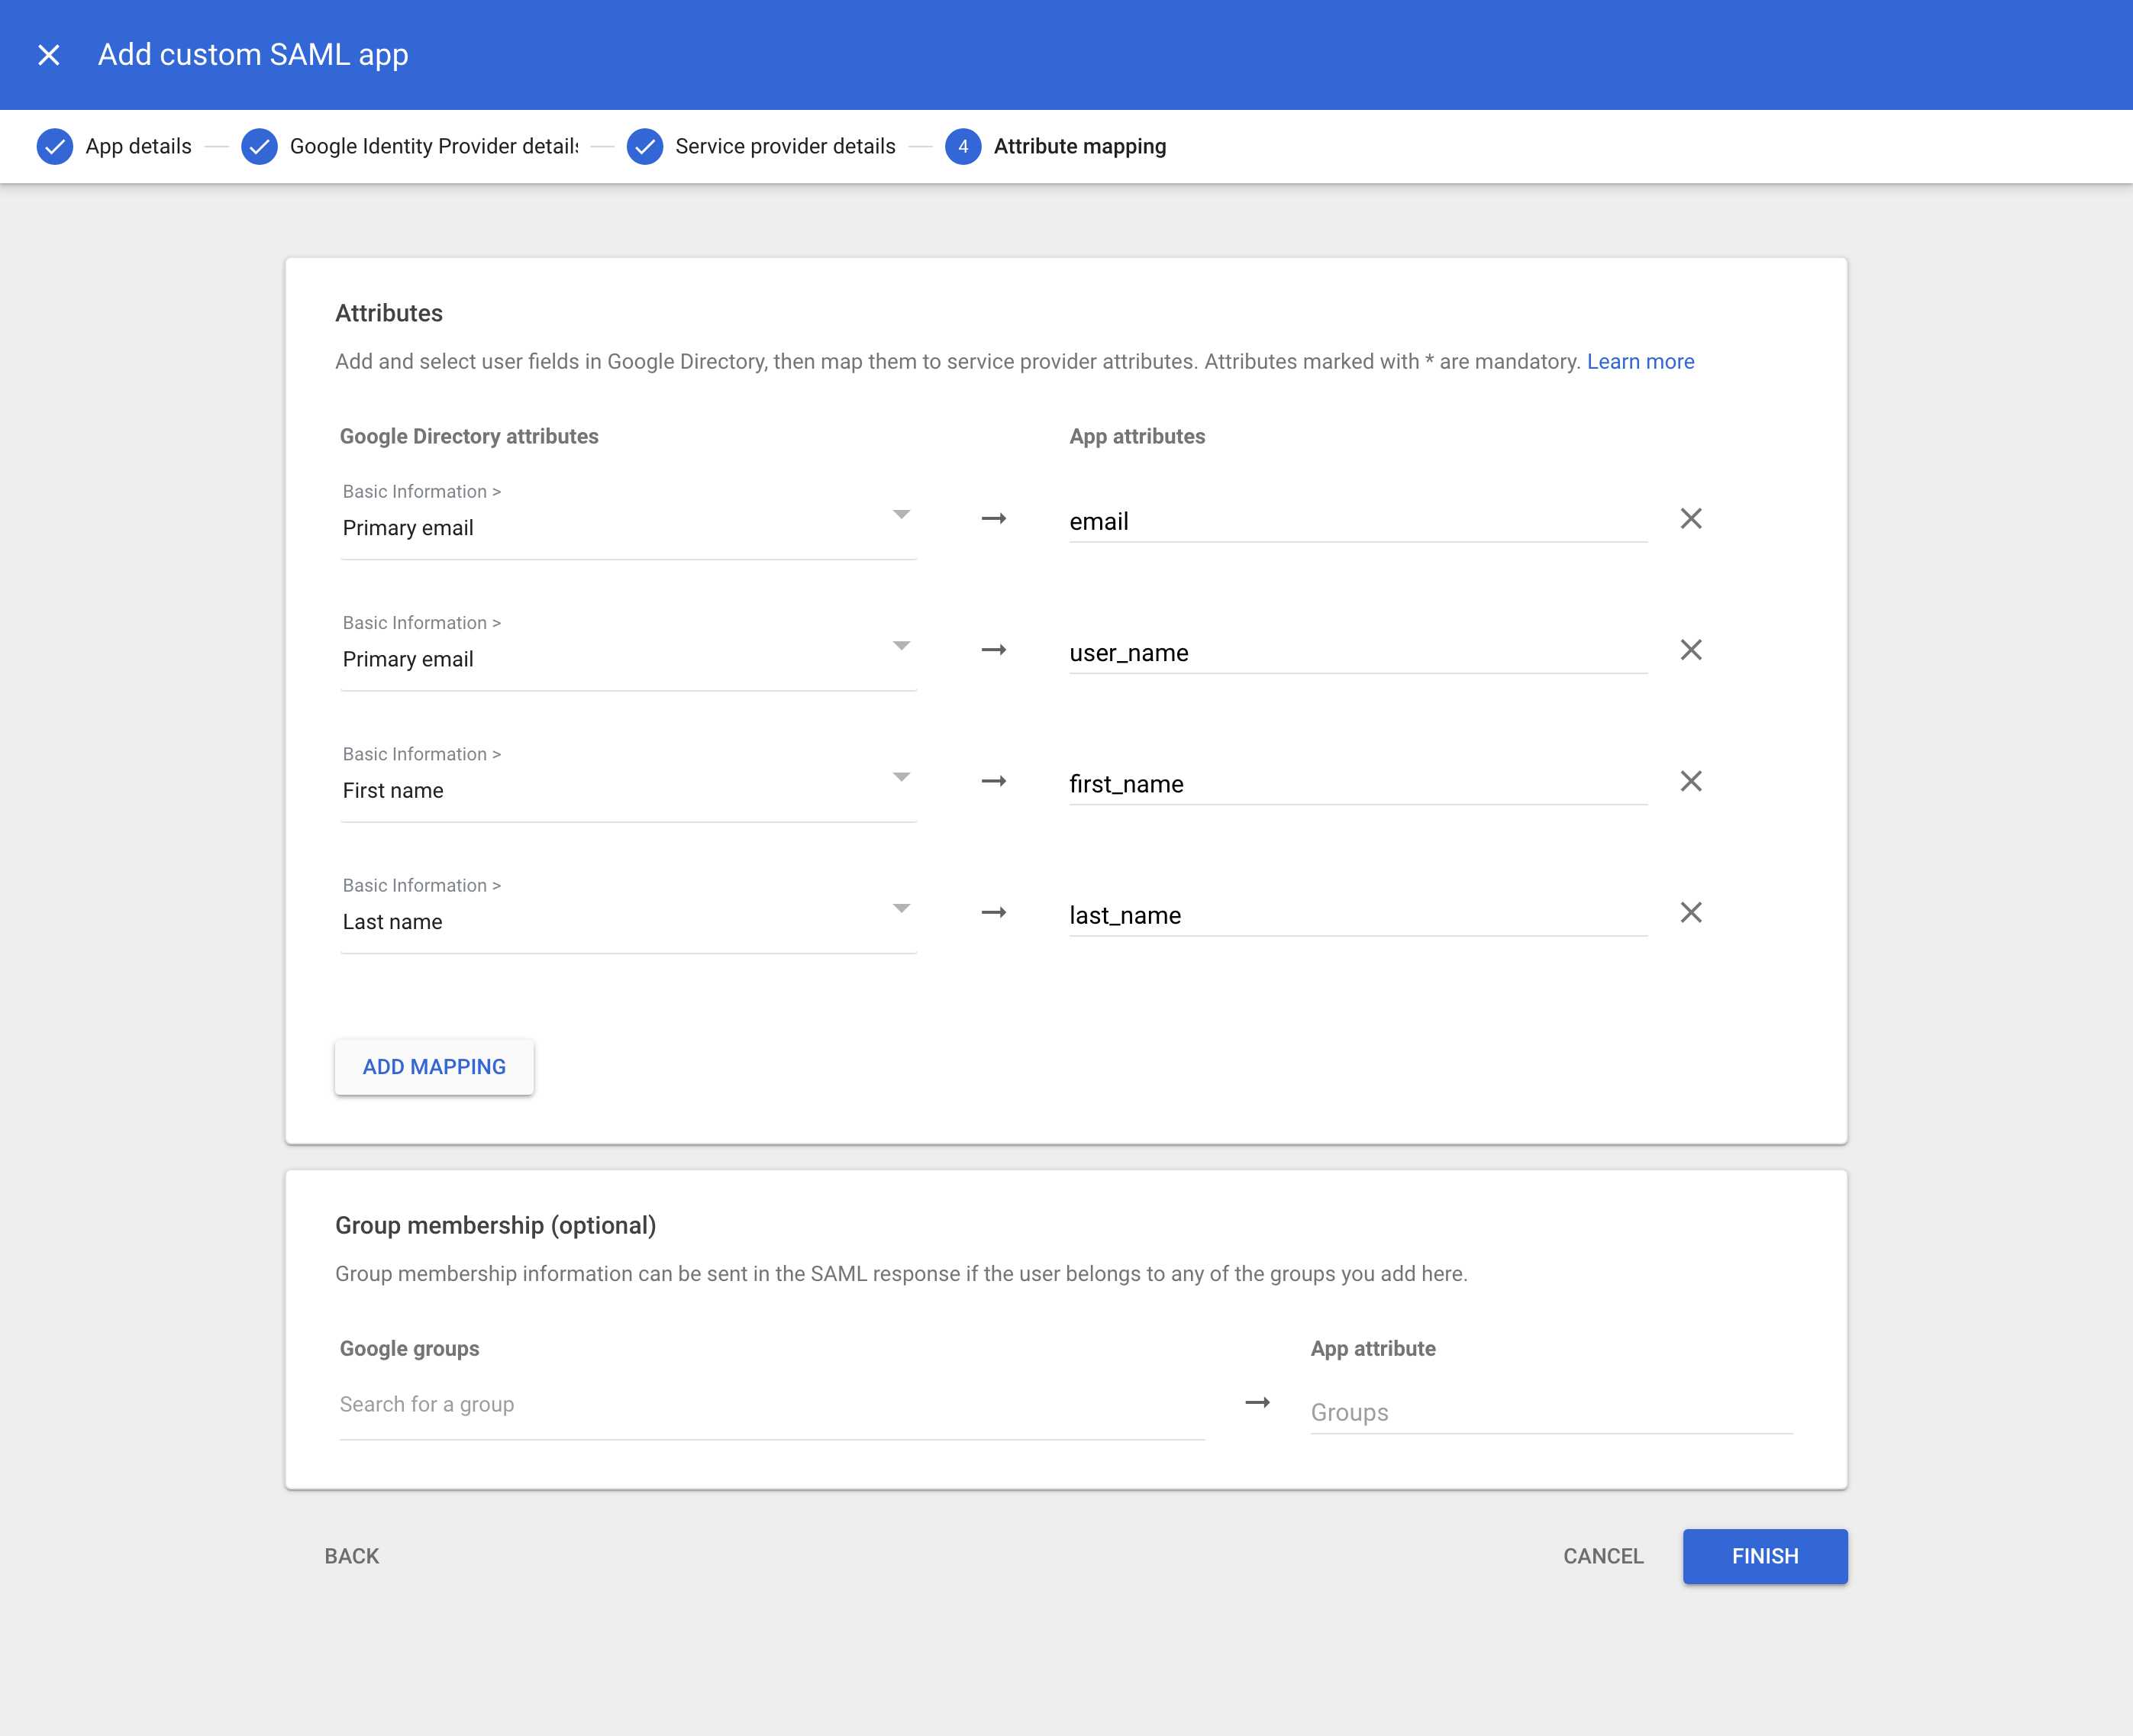 Google Workspace: Web and mobile apps admin console, Add custom SAML,
Attribute mapping